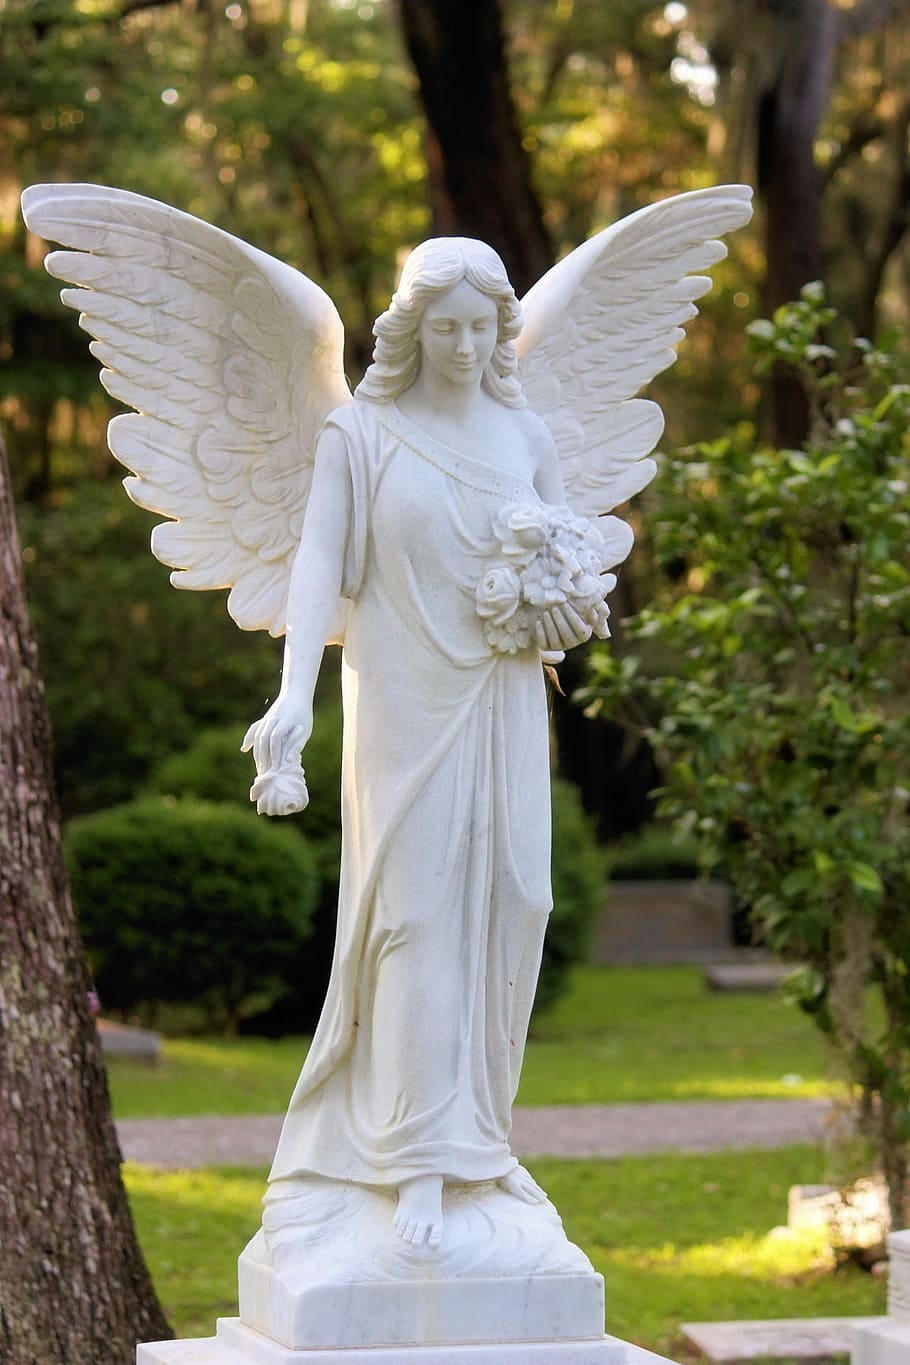 female, angel statue, garden, angel, wings, cemetery, peaceful, grave, trees, nature